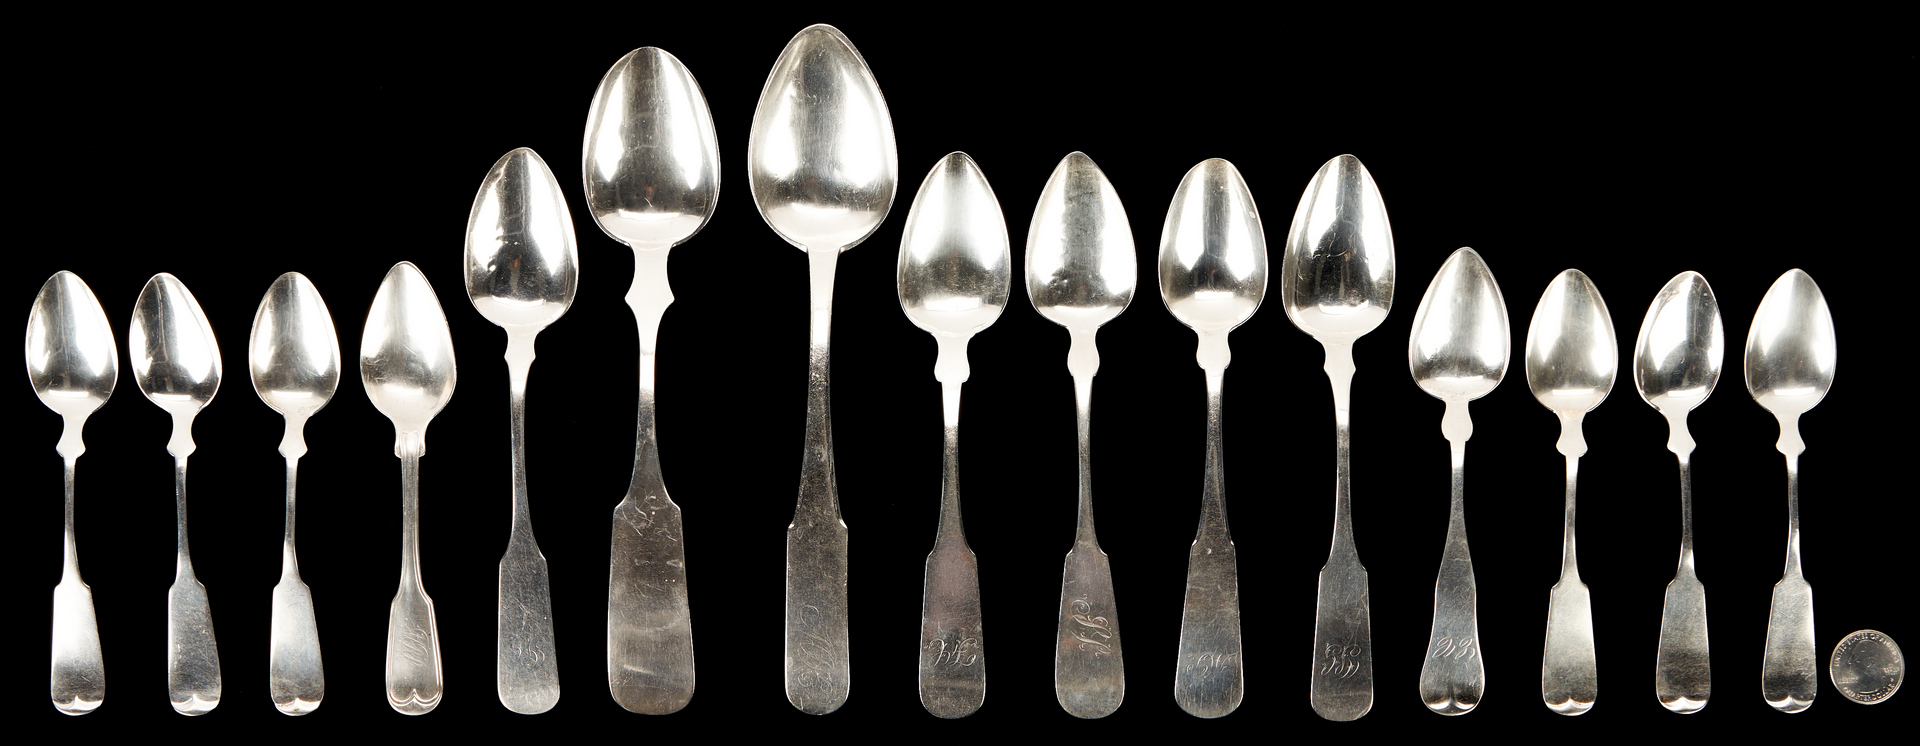 Lot 772: 15 Coin Silver and Sterling Spoons incl. Asa Blanchard, Kentucky